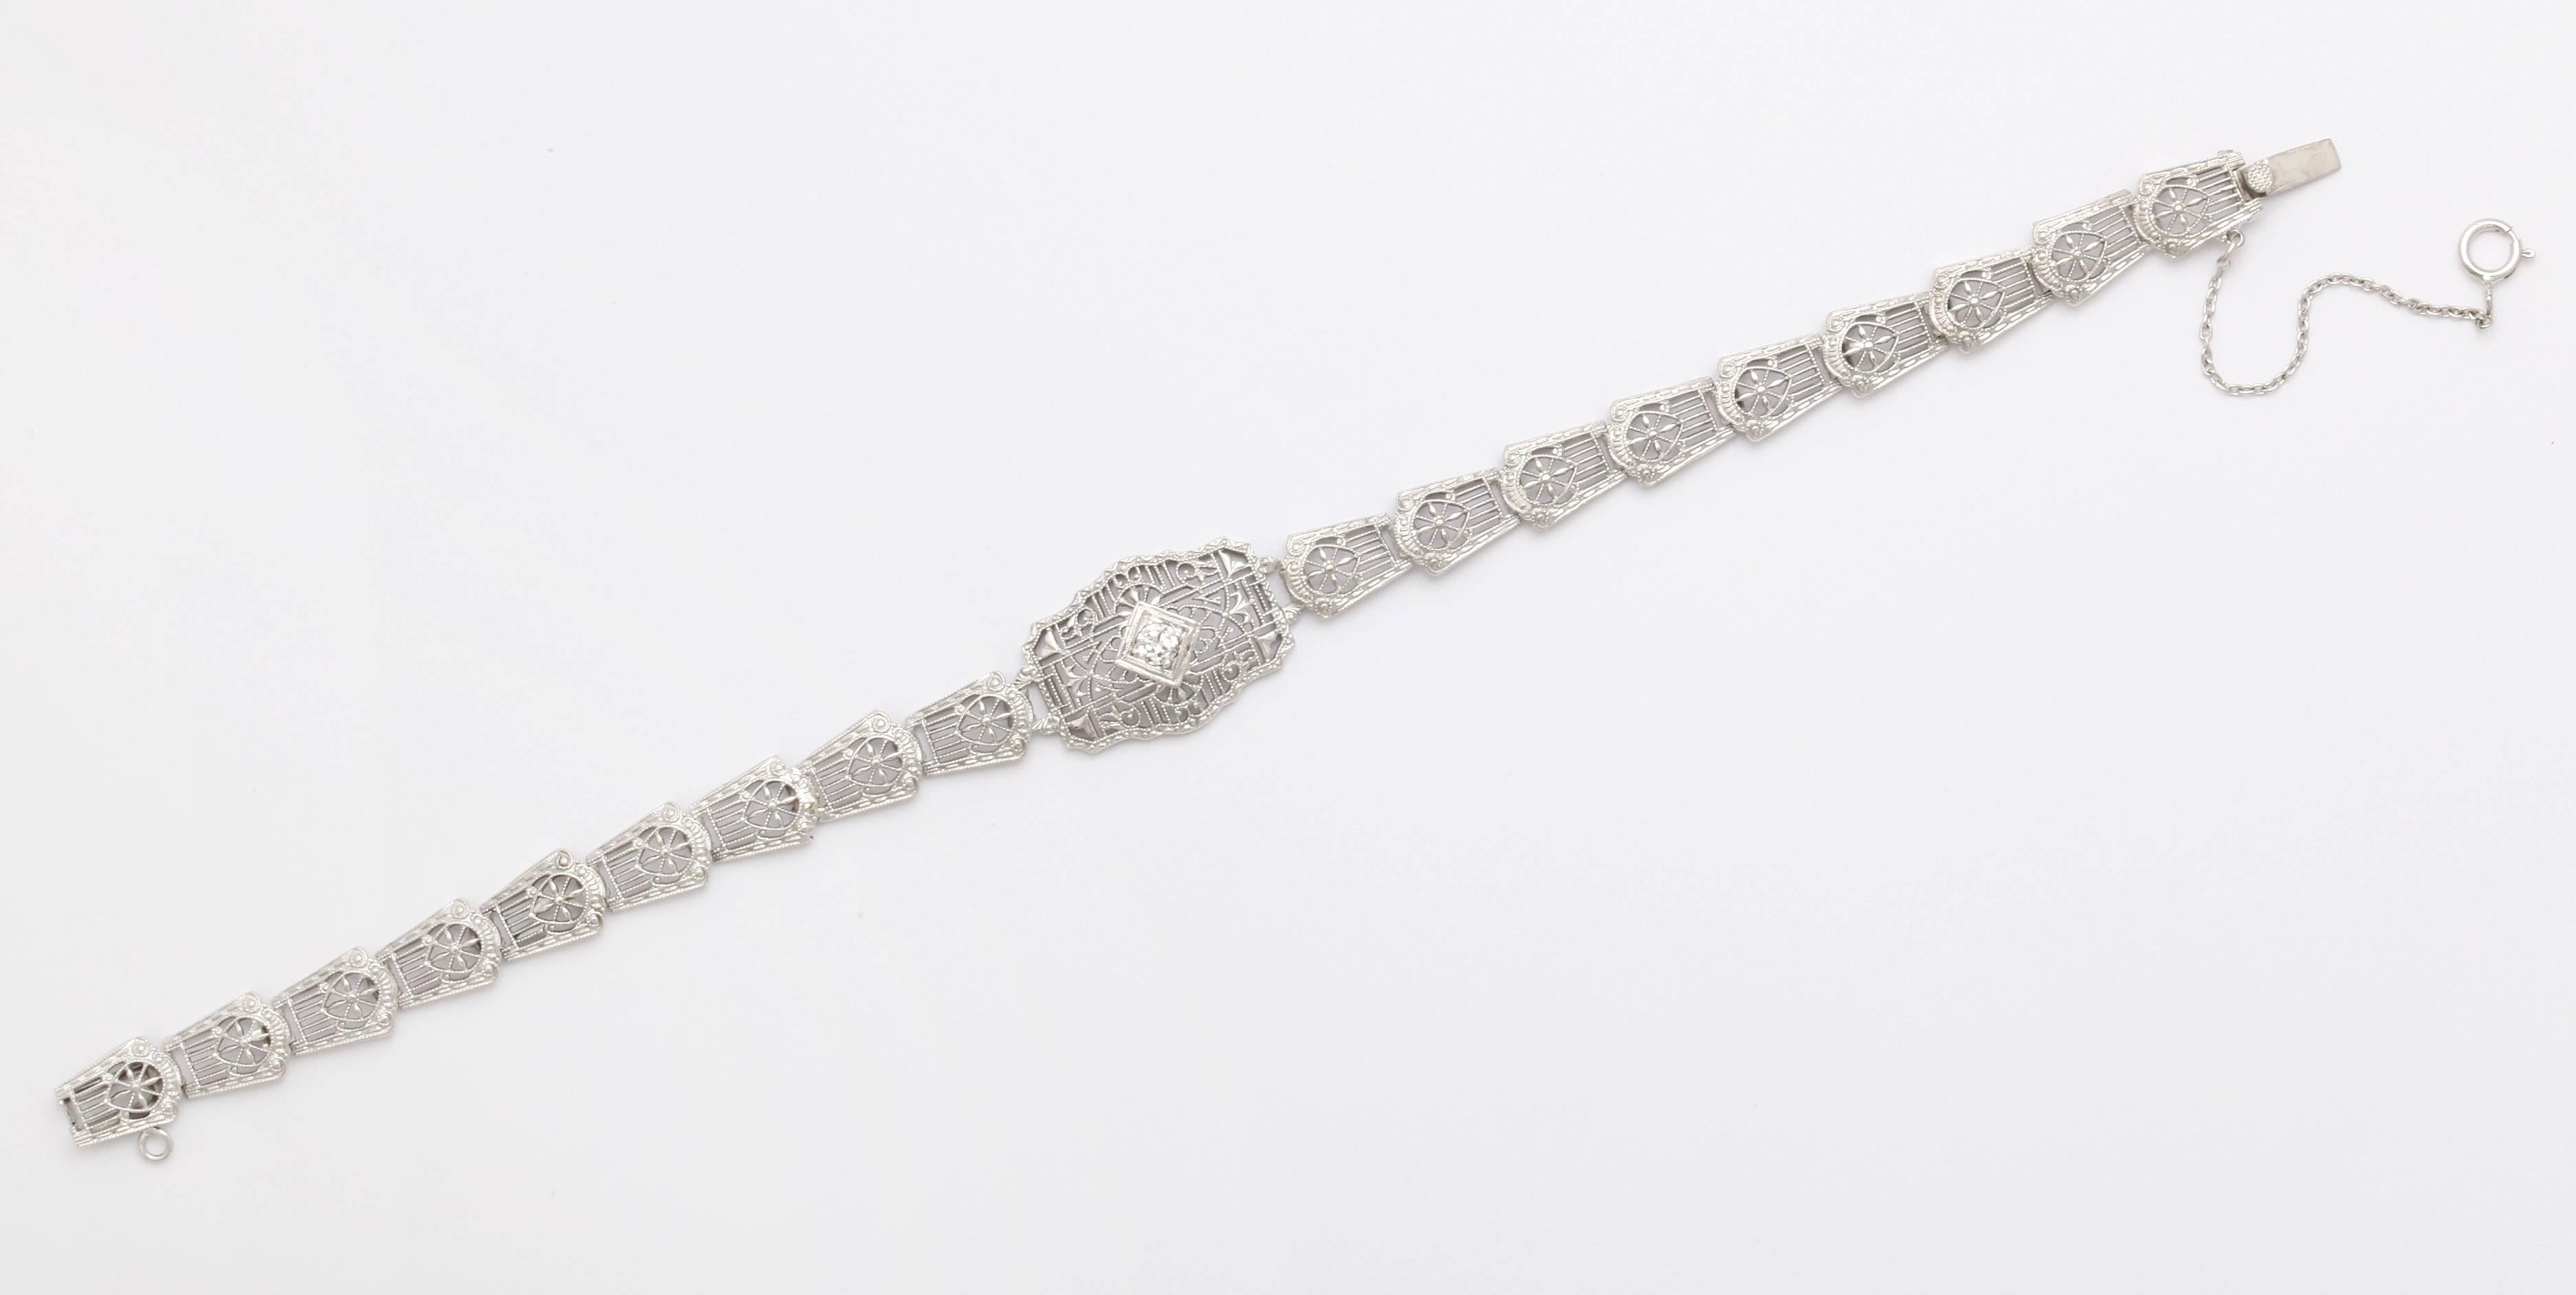 A delicate, White 14kt gold bracelet has links of  stunning architectural design set with a central diamond. The bracelet is an example of the classic filigree work of the Art Deco era.  The gold is fine and reminiscent of lace yet strong. Fine